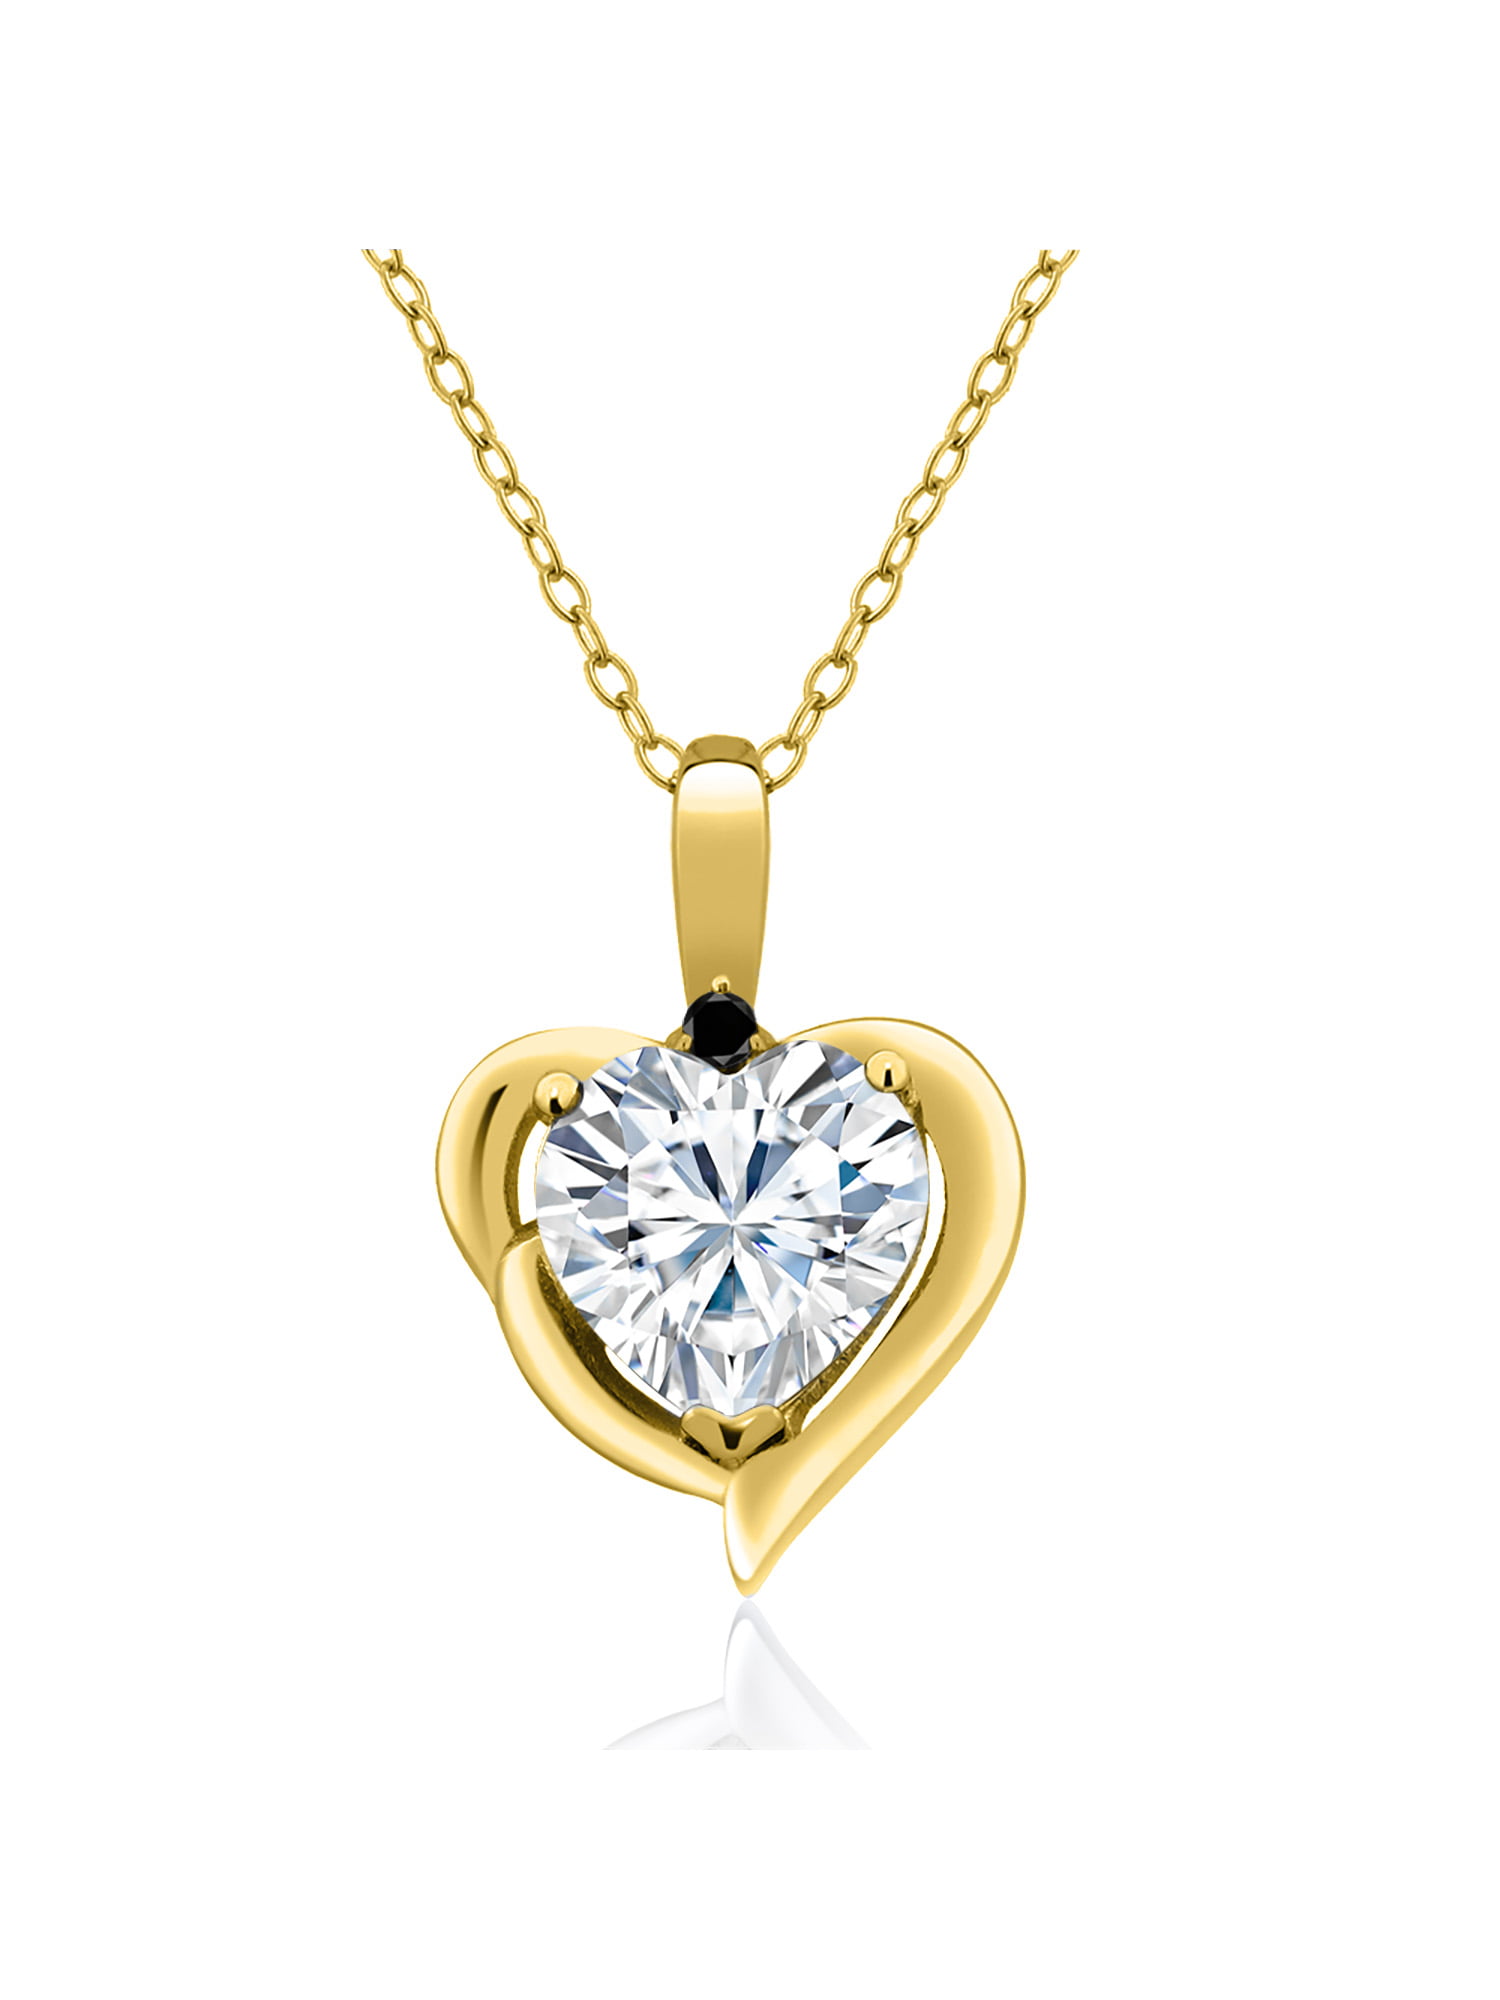 Gem Stone King 18K Yellow Gold Plated Silver Pendant Necklace Forever Brilliant (ghi) Heart Shape 1.82cttw Created Moissanite by Charles & Colvard and